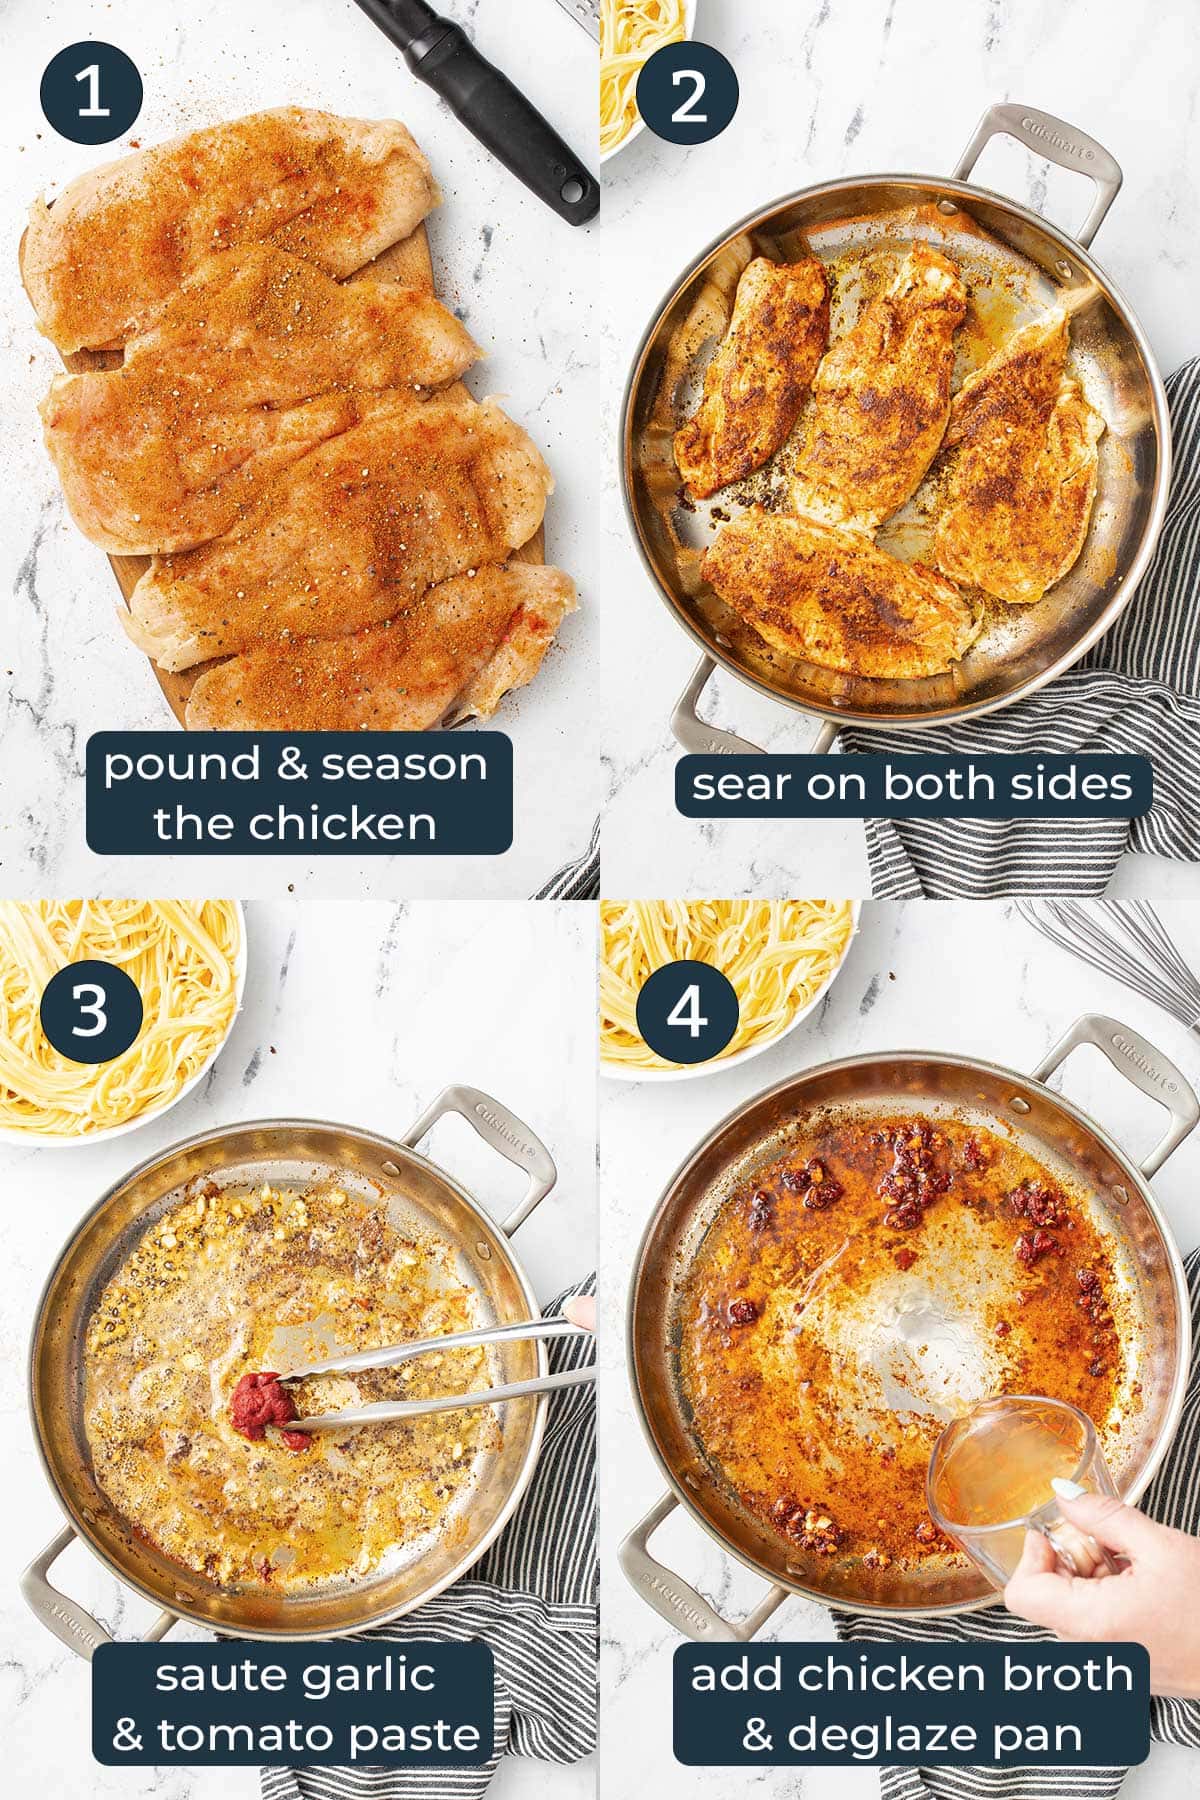 Four step-by-step photos on how to make creamy Cajun chicken pasta in a skillet.